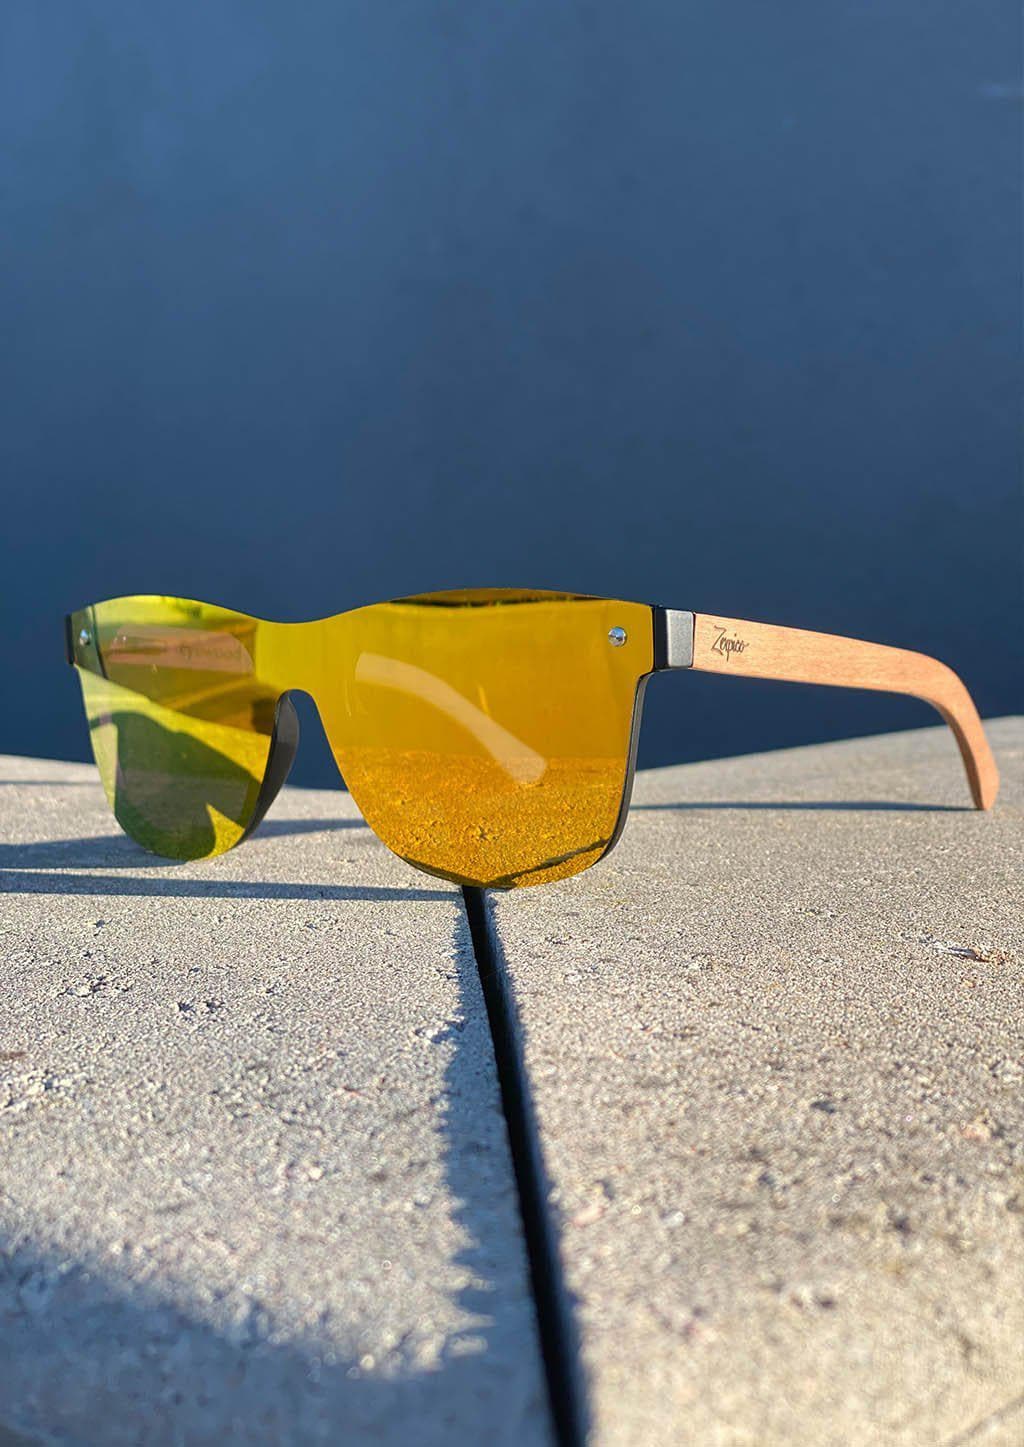 Eyewood tomorrow is our modern cool take on classic models. This is Scorpius with yellow mirror lenses. Nice wooden sunglasses outside in the sun in Sweden.